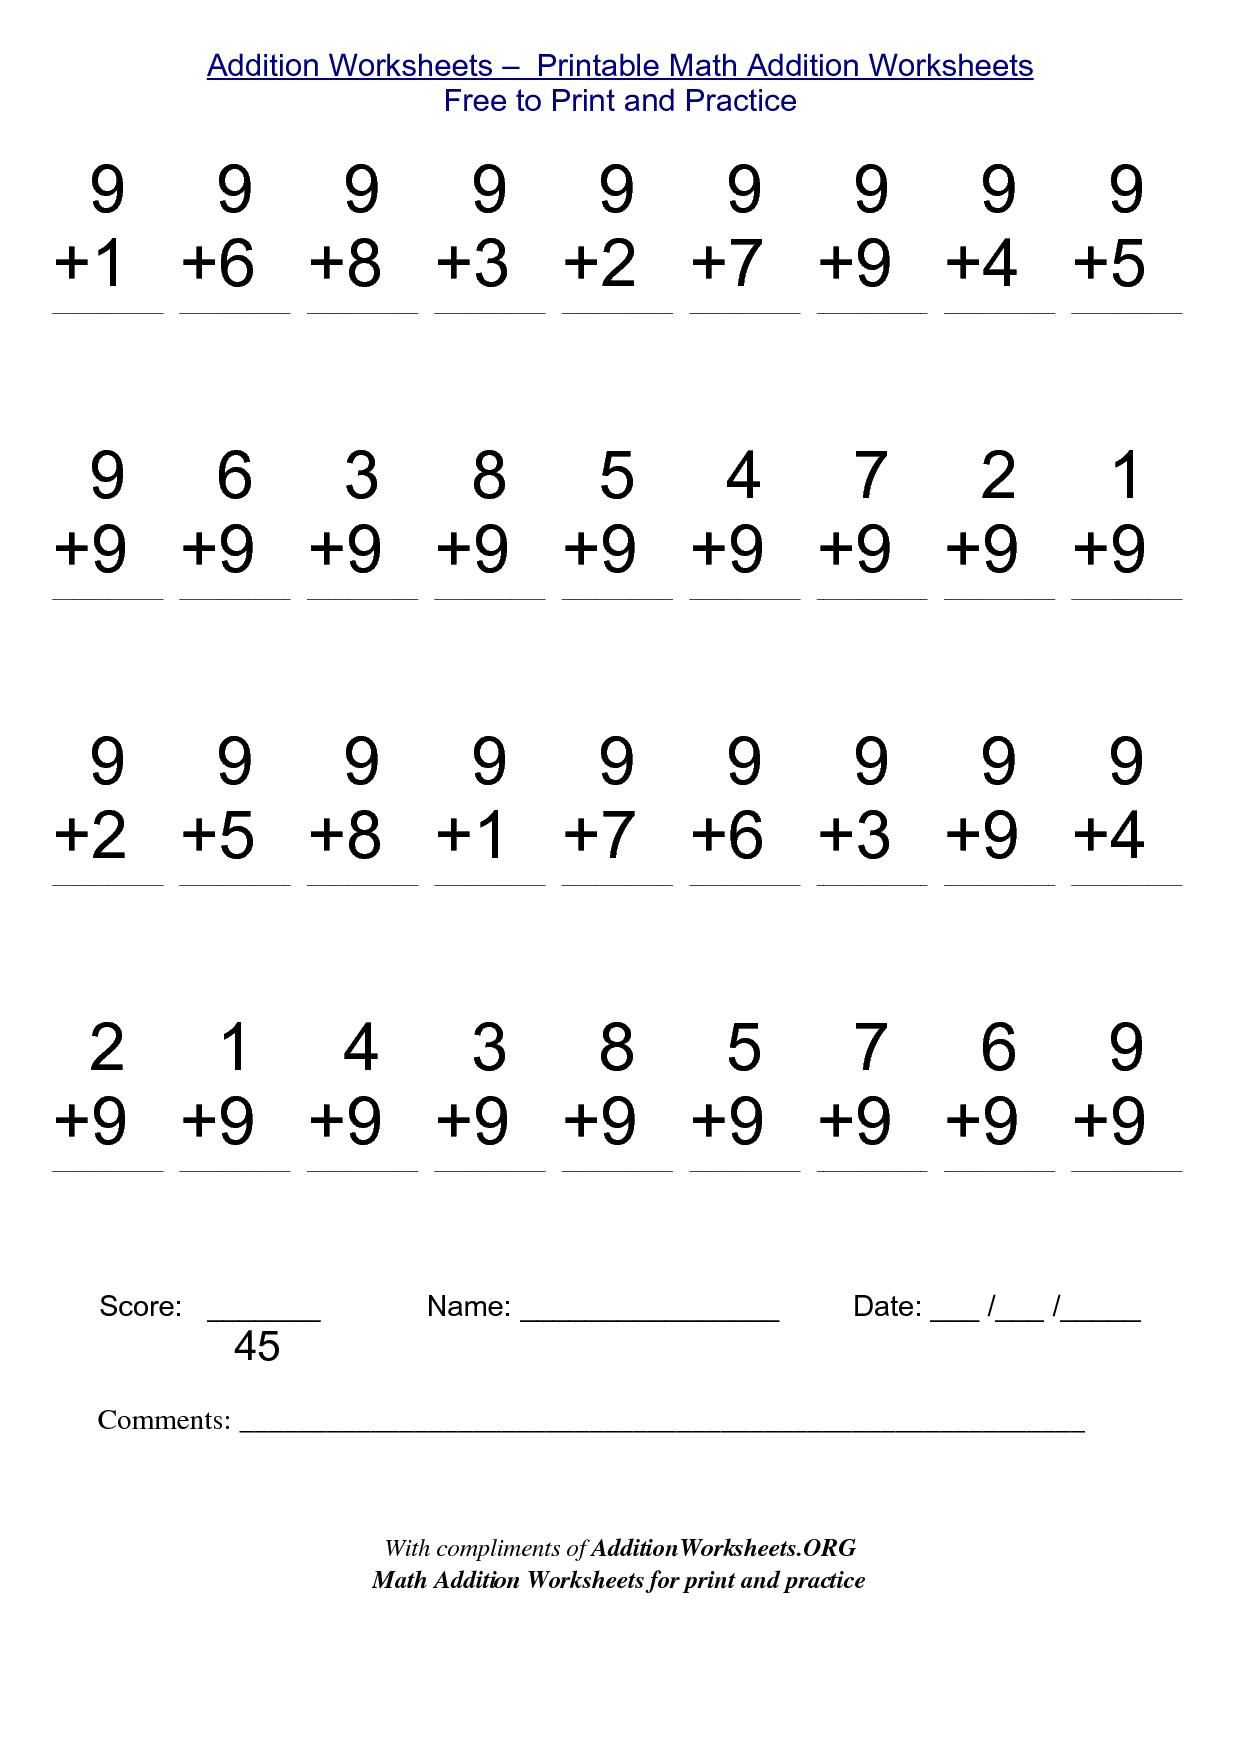 Math Worksheets For Free To Print - Alot | Me | Pinterest | Math - Free Printable Worksheets For 2Nd Grade